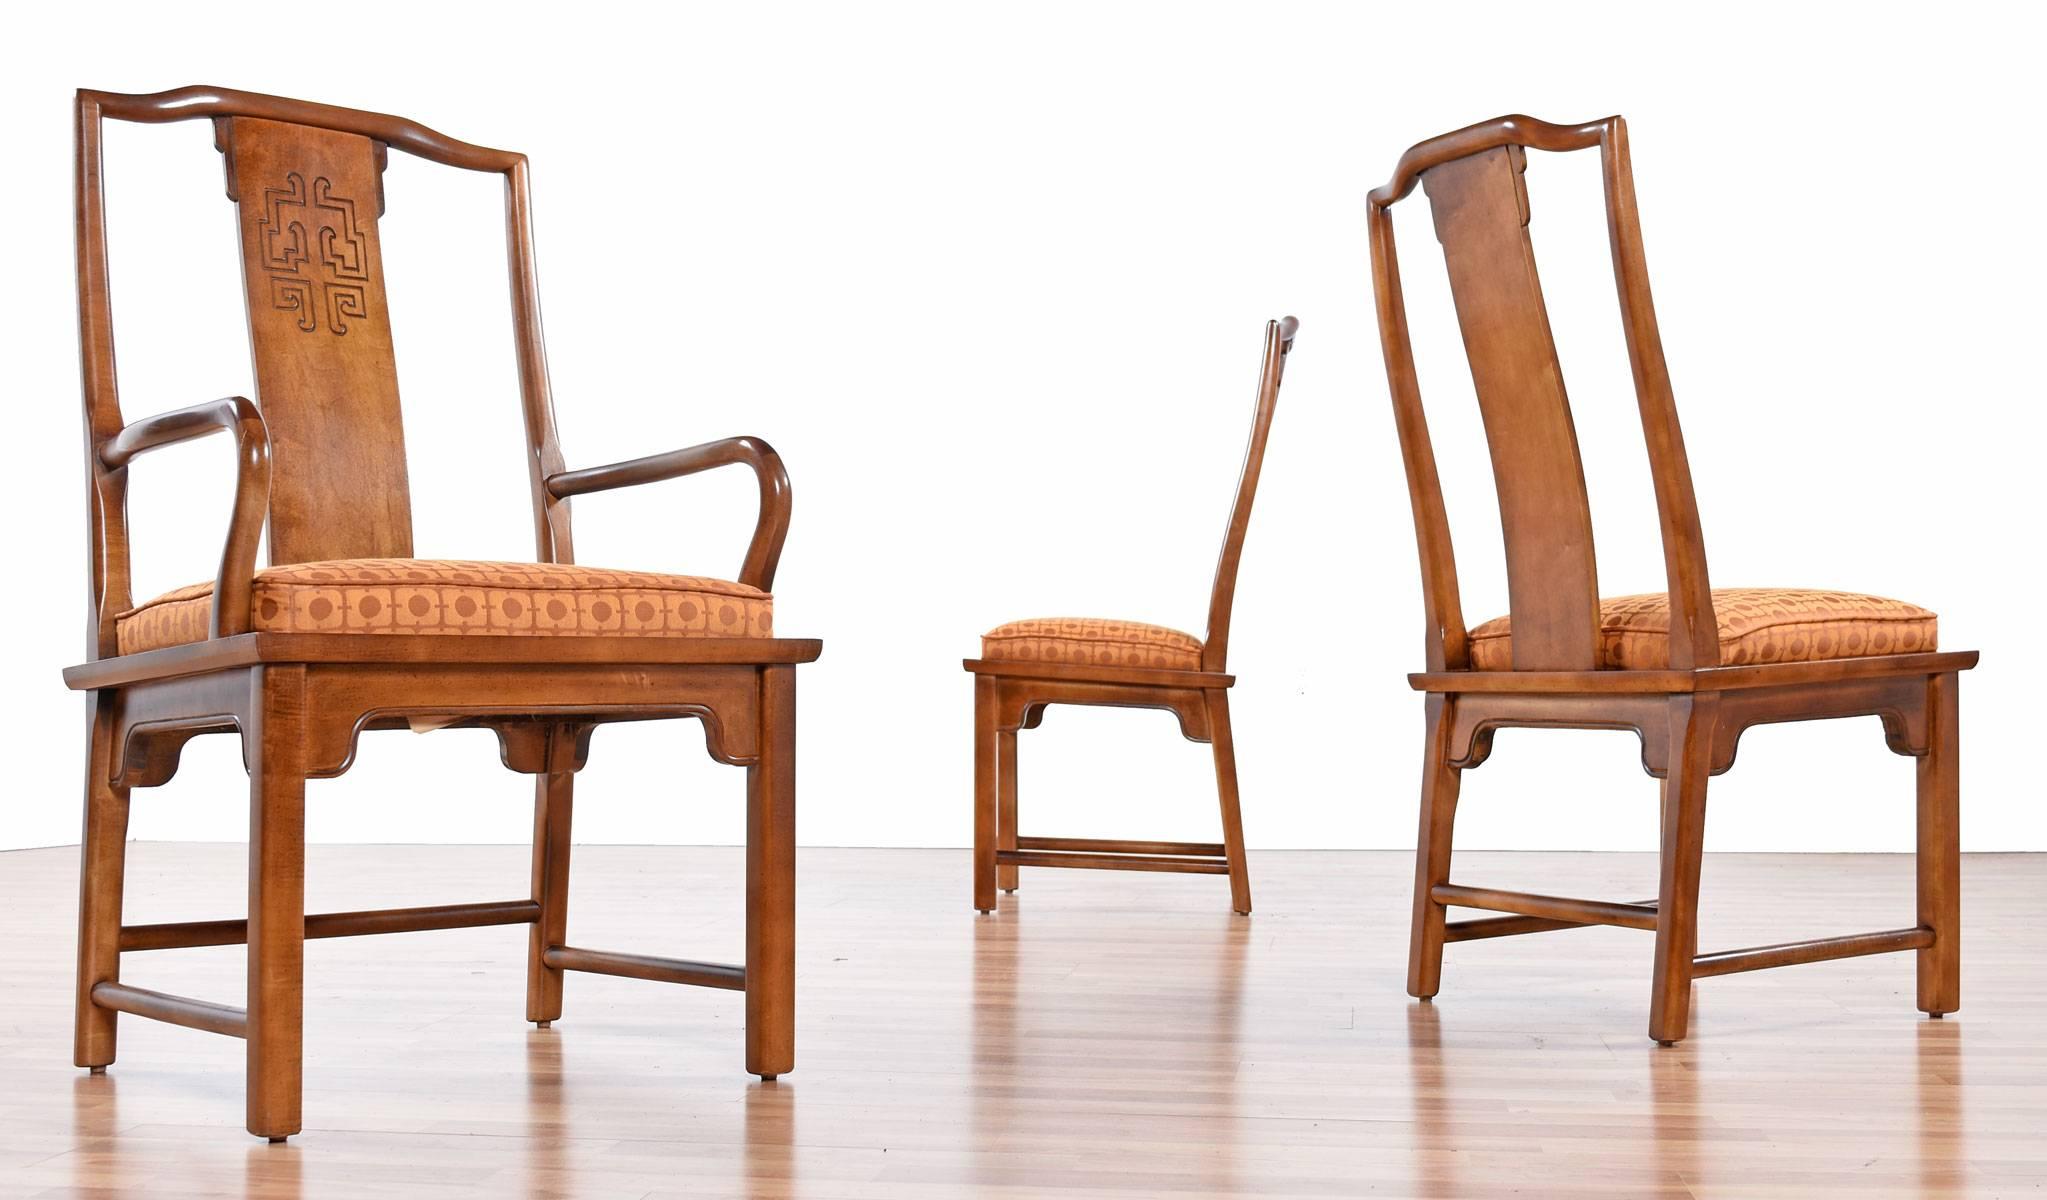 This lovely set of six Chin Hua dining chairs by Raymond K. Sobota for Century Furniture add a modern Asian flair to any dining room. The set includes two arm chairs and four armless chairs, all have a Classic Chinese motif carved into the wood